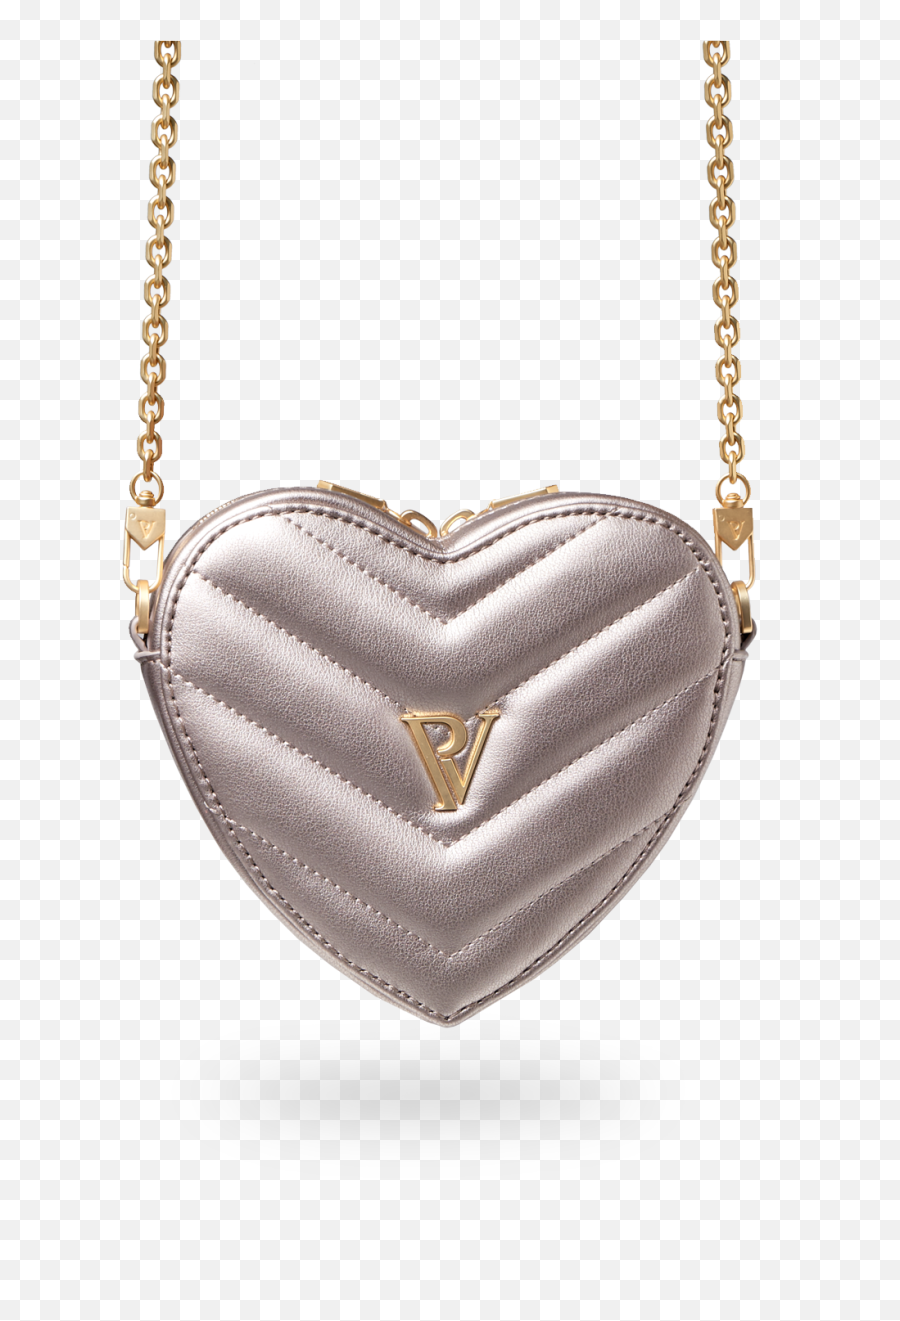 Candice Heart Bag Metallic - Paul Valentine Tasche Png,Falling Hearts Png